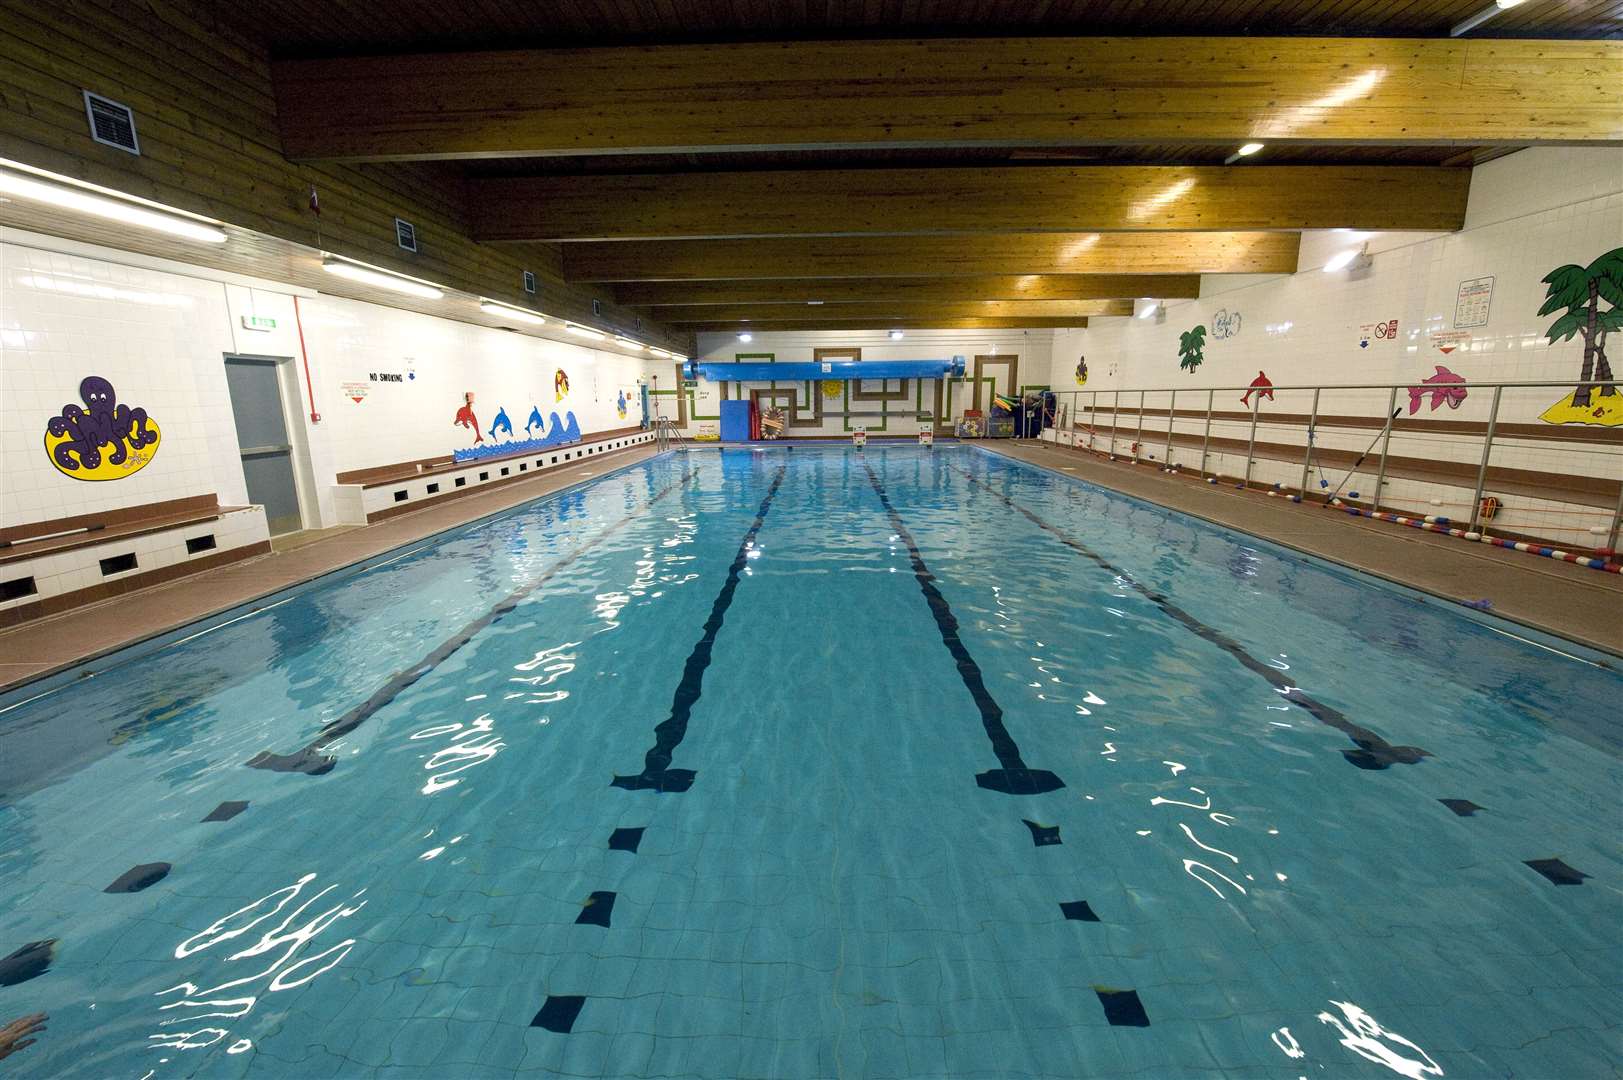 Swimming pools such as the one at Turriff could now be set to open from September.